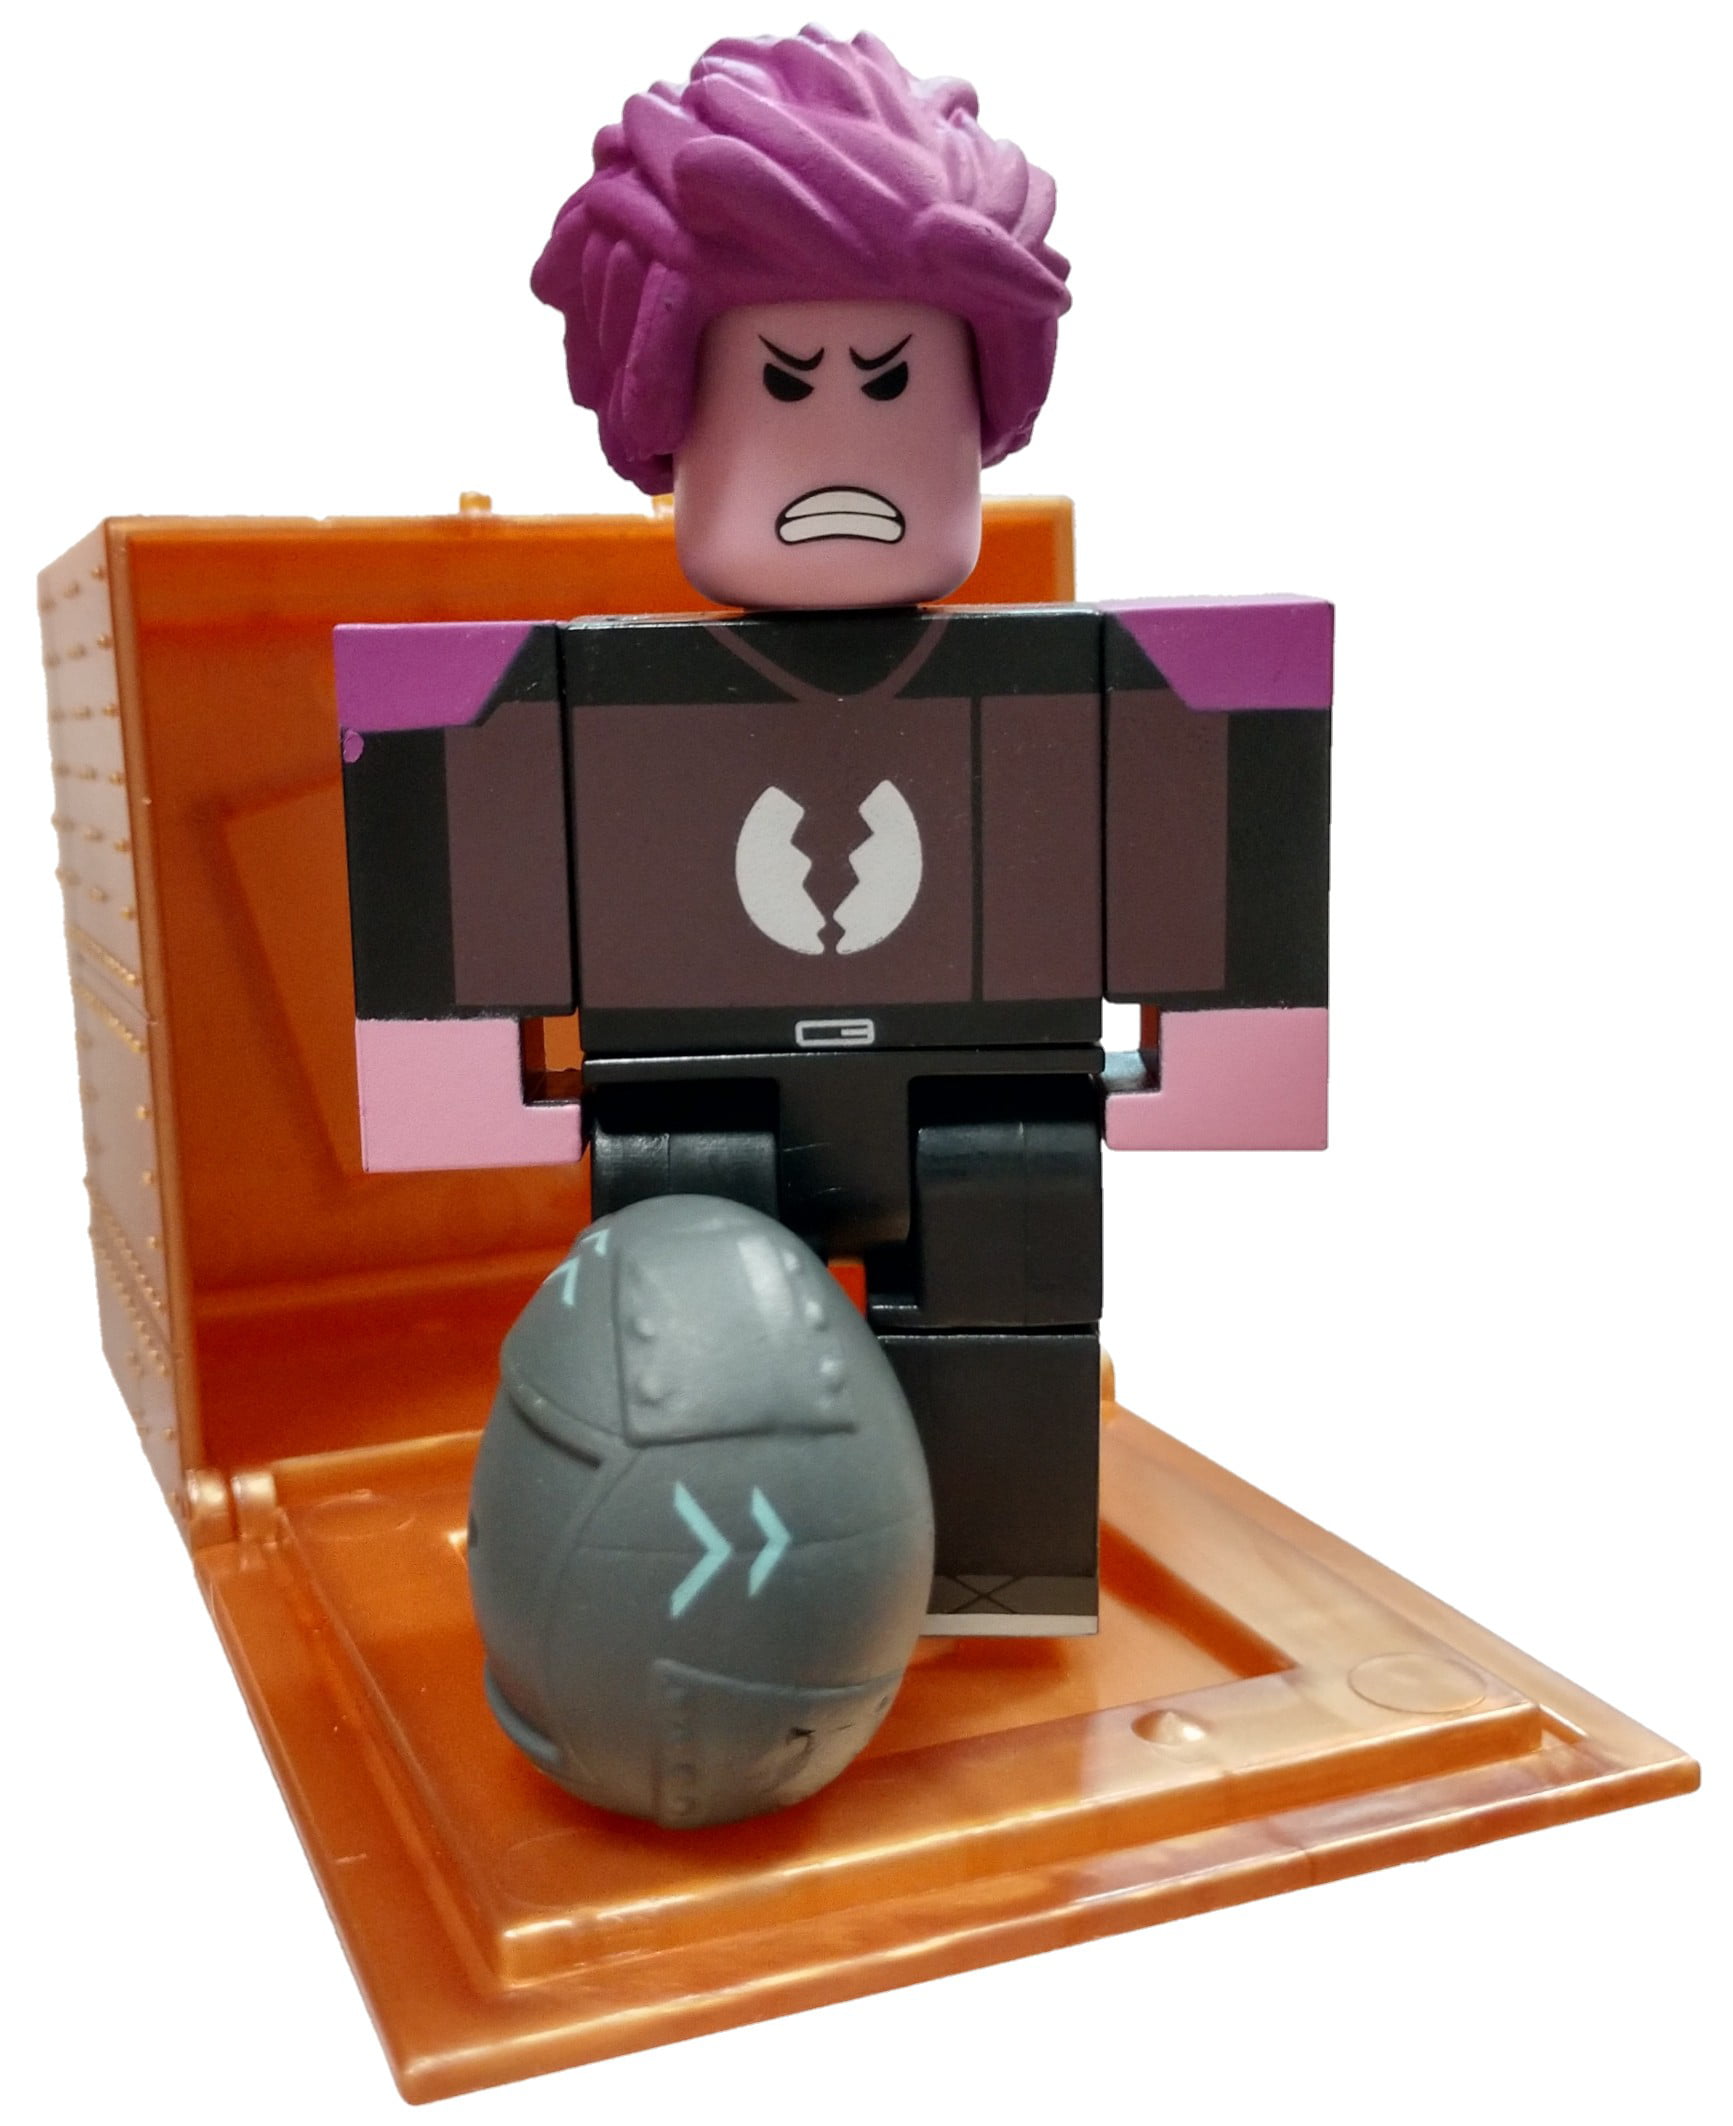 Roblox Series 8 Egg Hunt 2019 Evil Eggwick Mini Figure With Cube And Online Code No Packaging Walmart Com Walmart Com - evil side face roblox